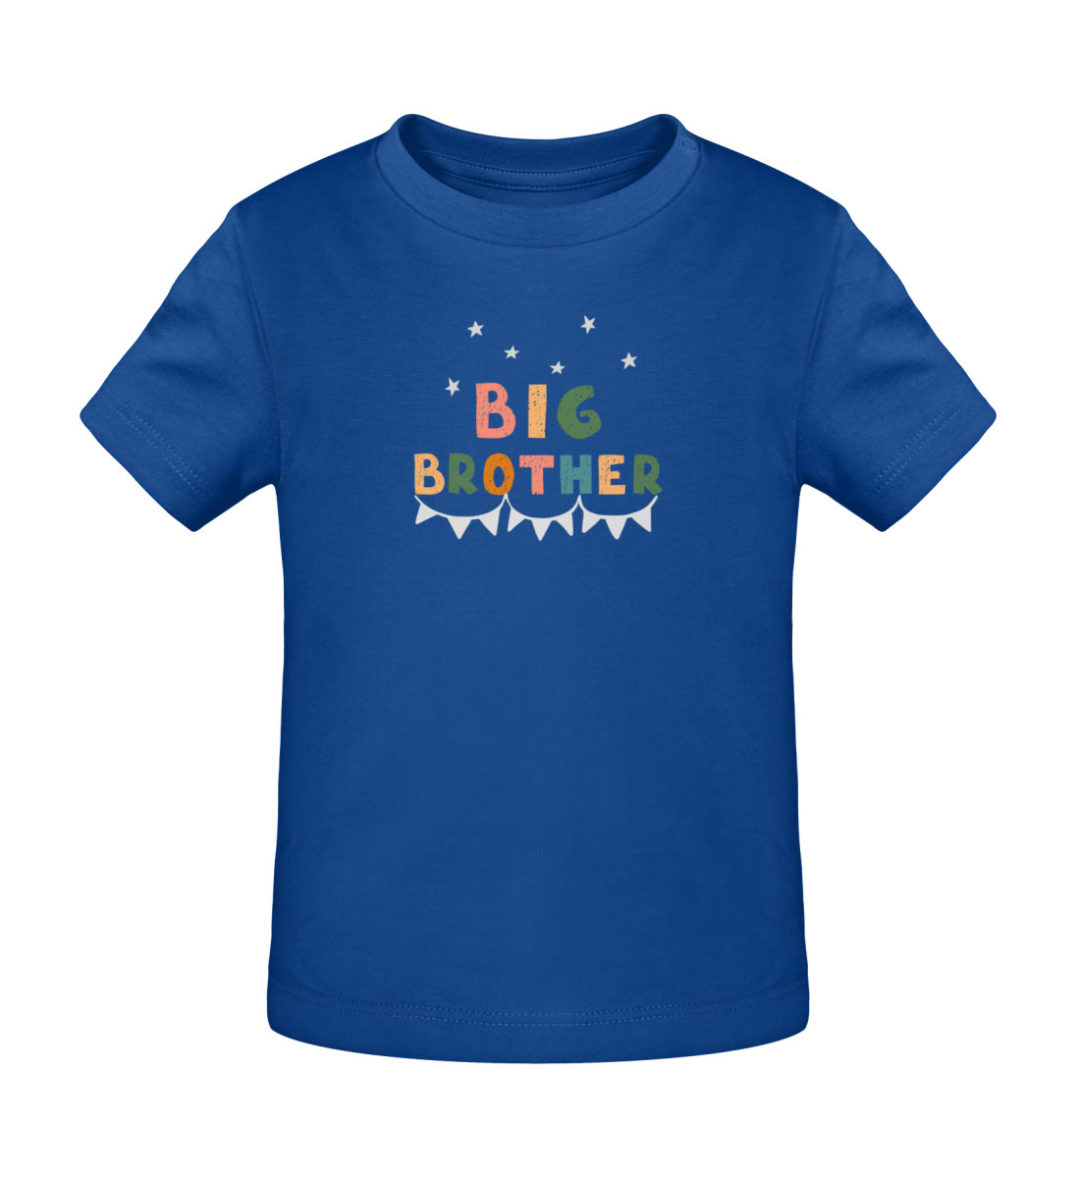 Big Brother - Baby Creator T-Shirt ST/ST-7106